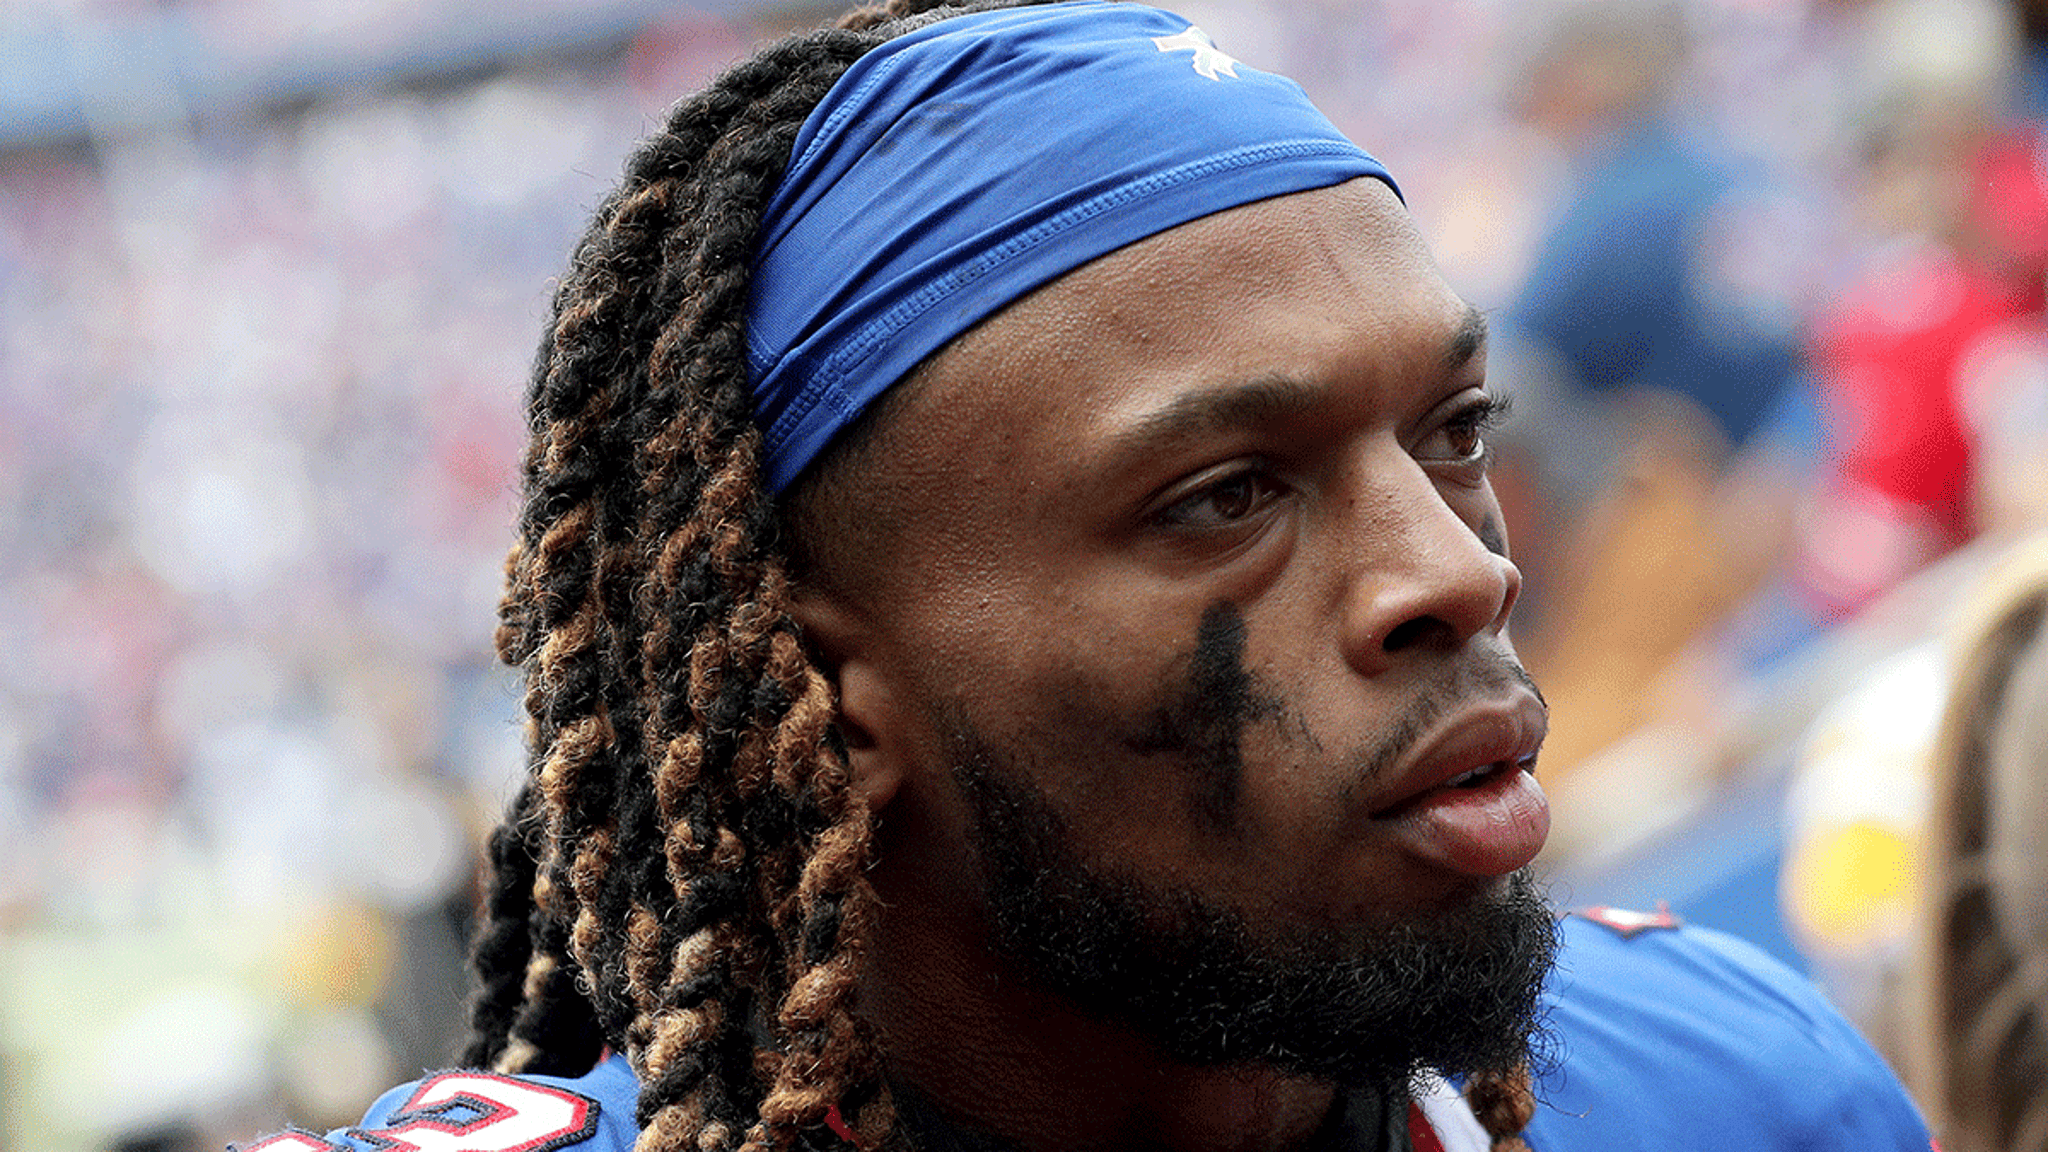 Bills Safety Damar Hamlin Collapses On Field, Officials Administer Emergency CPR